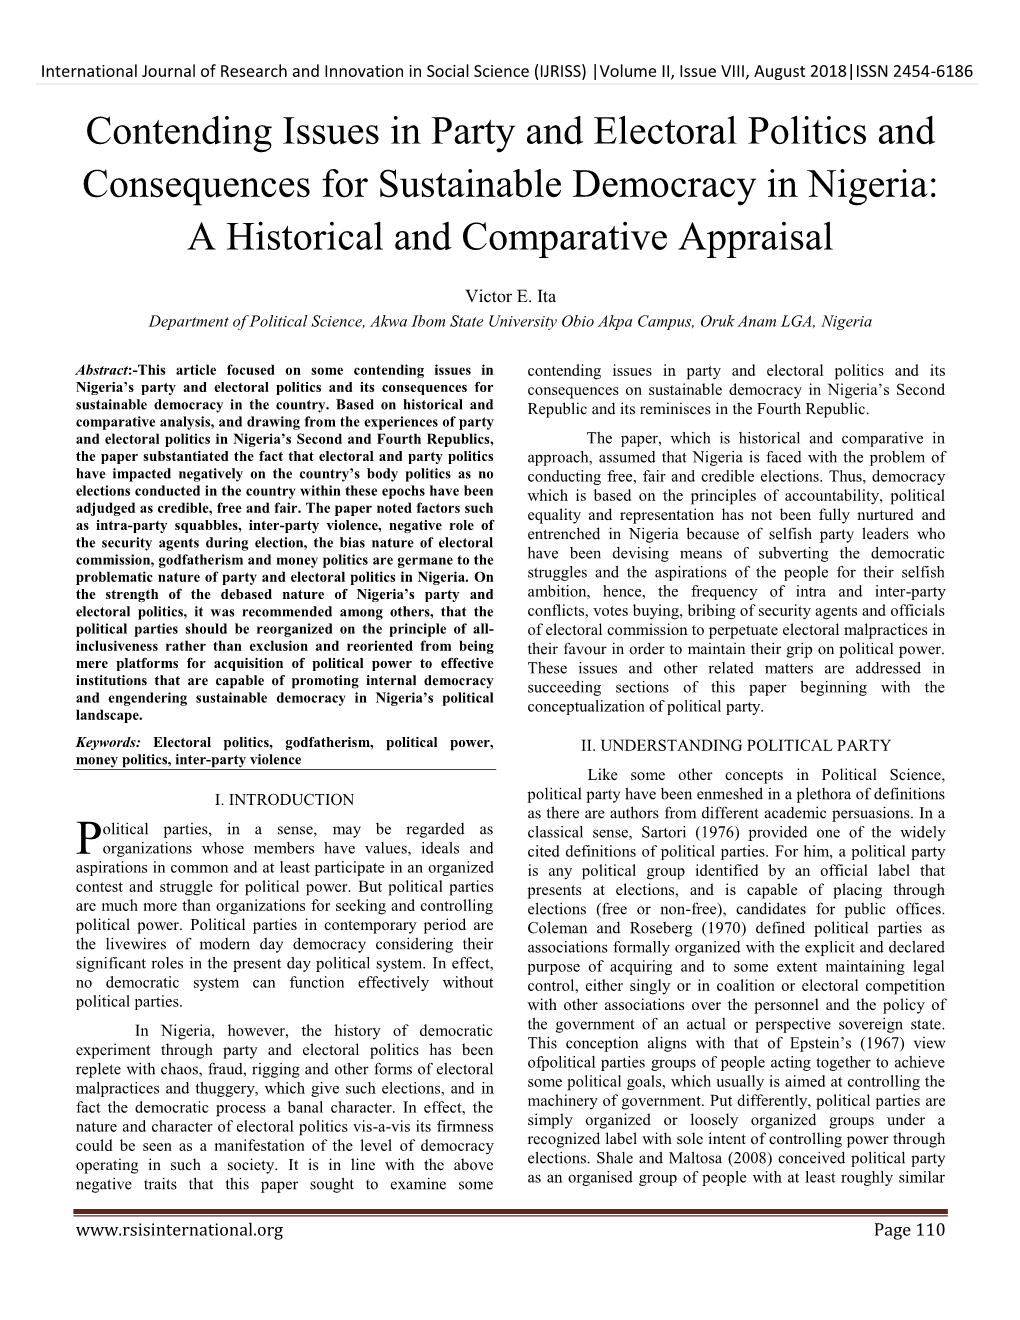 Contending Issues in Party and Electoral Politics and Consequences for Sustainable Democracy in Nigeria: a Historical and Comparative Appraisal